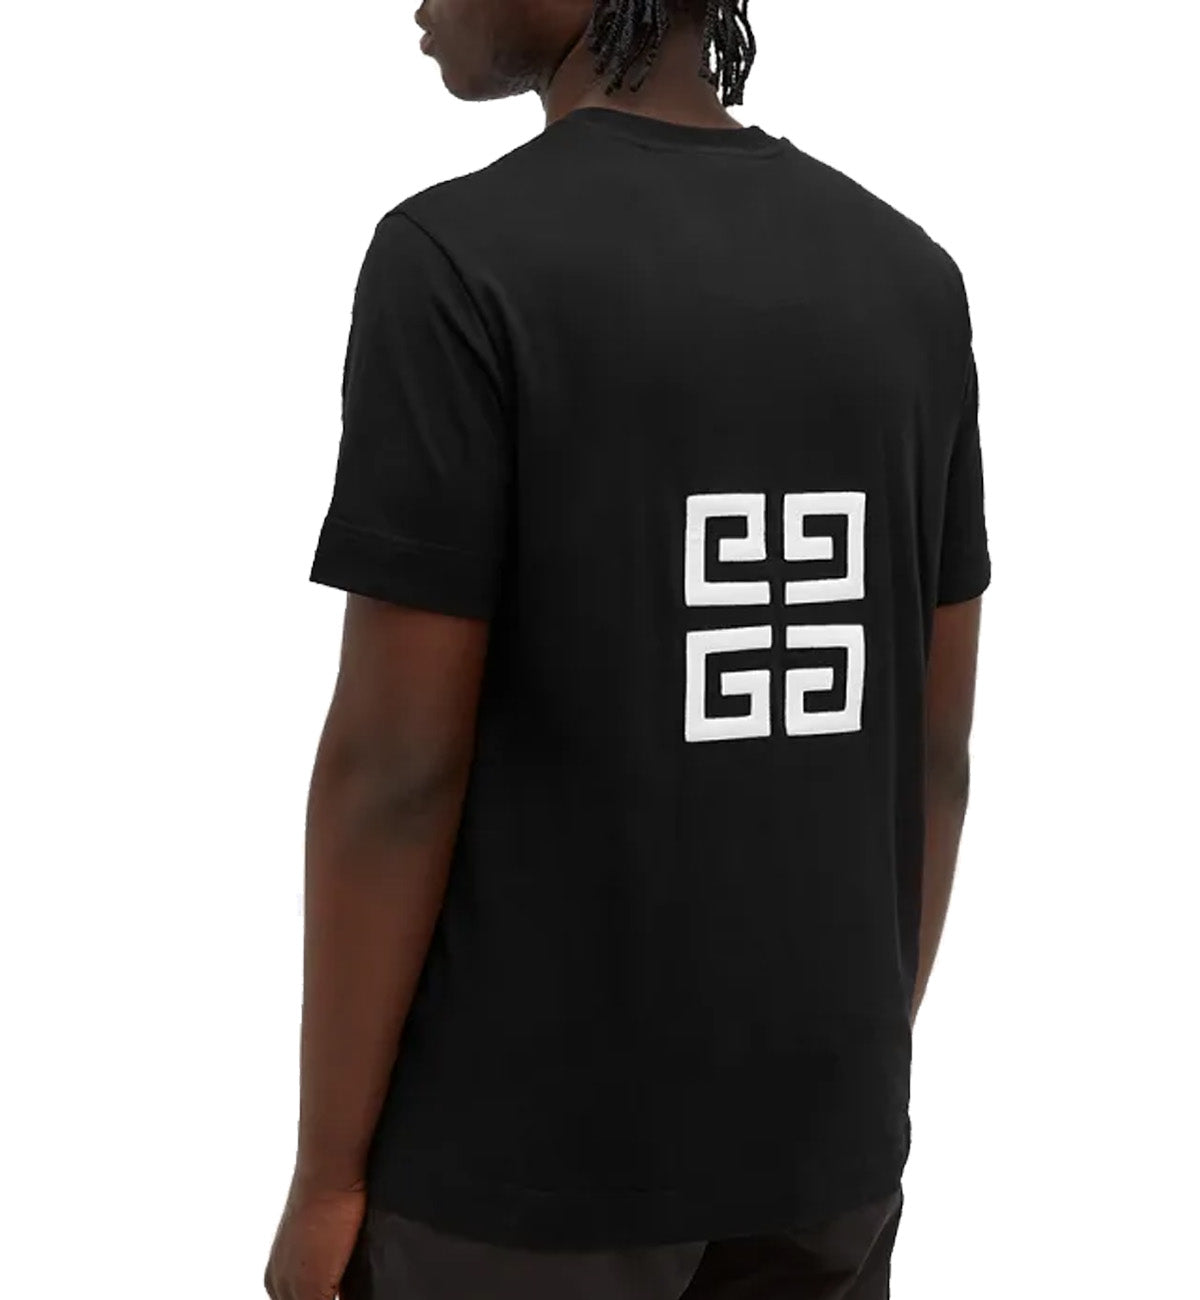 Givenchy 4G Embroidered Tee (Black)